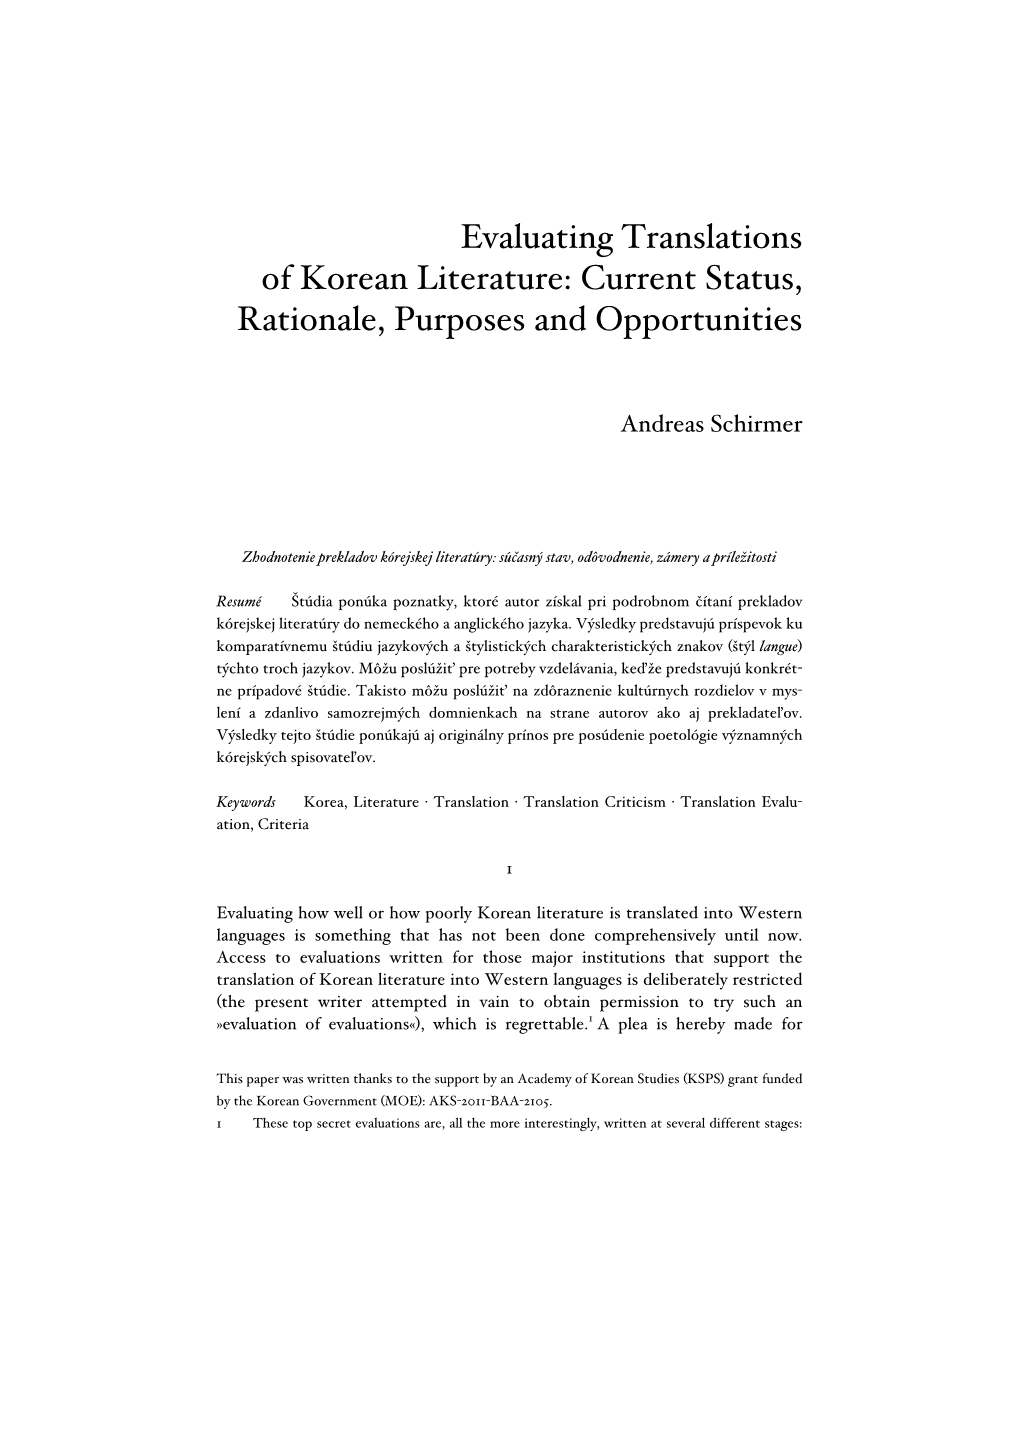 Evaluating Translations of Korean Literature: Current Status, Rationale, Purposes and Opportunities